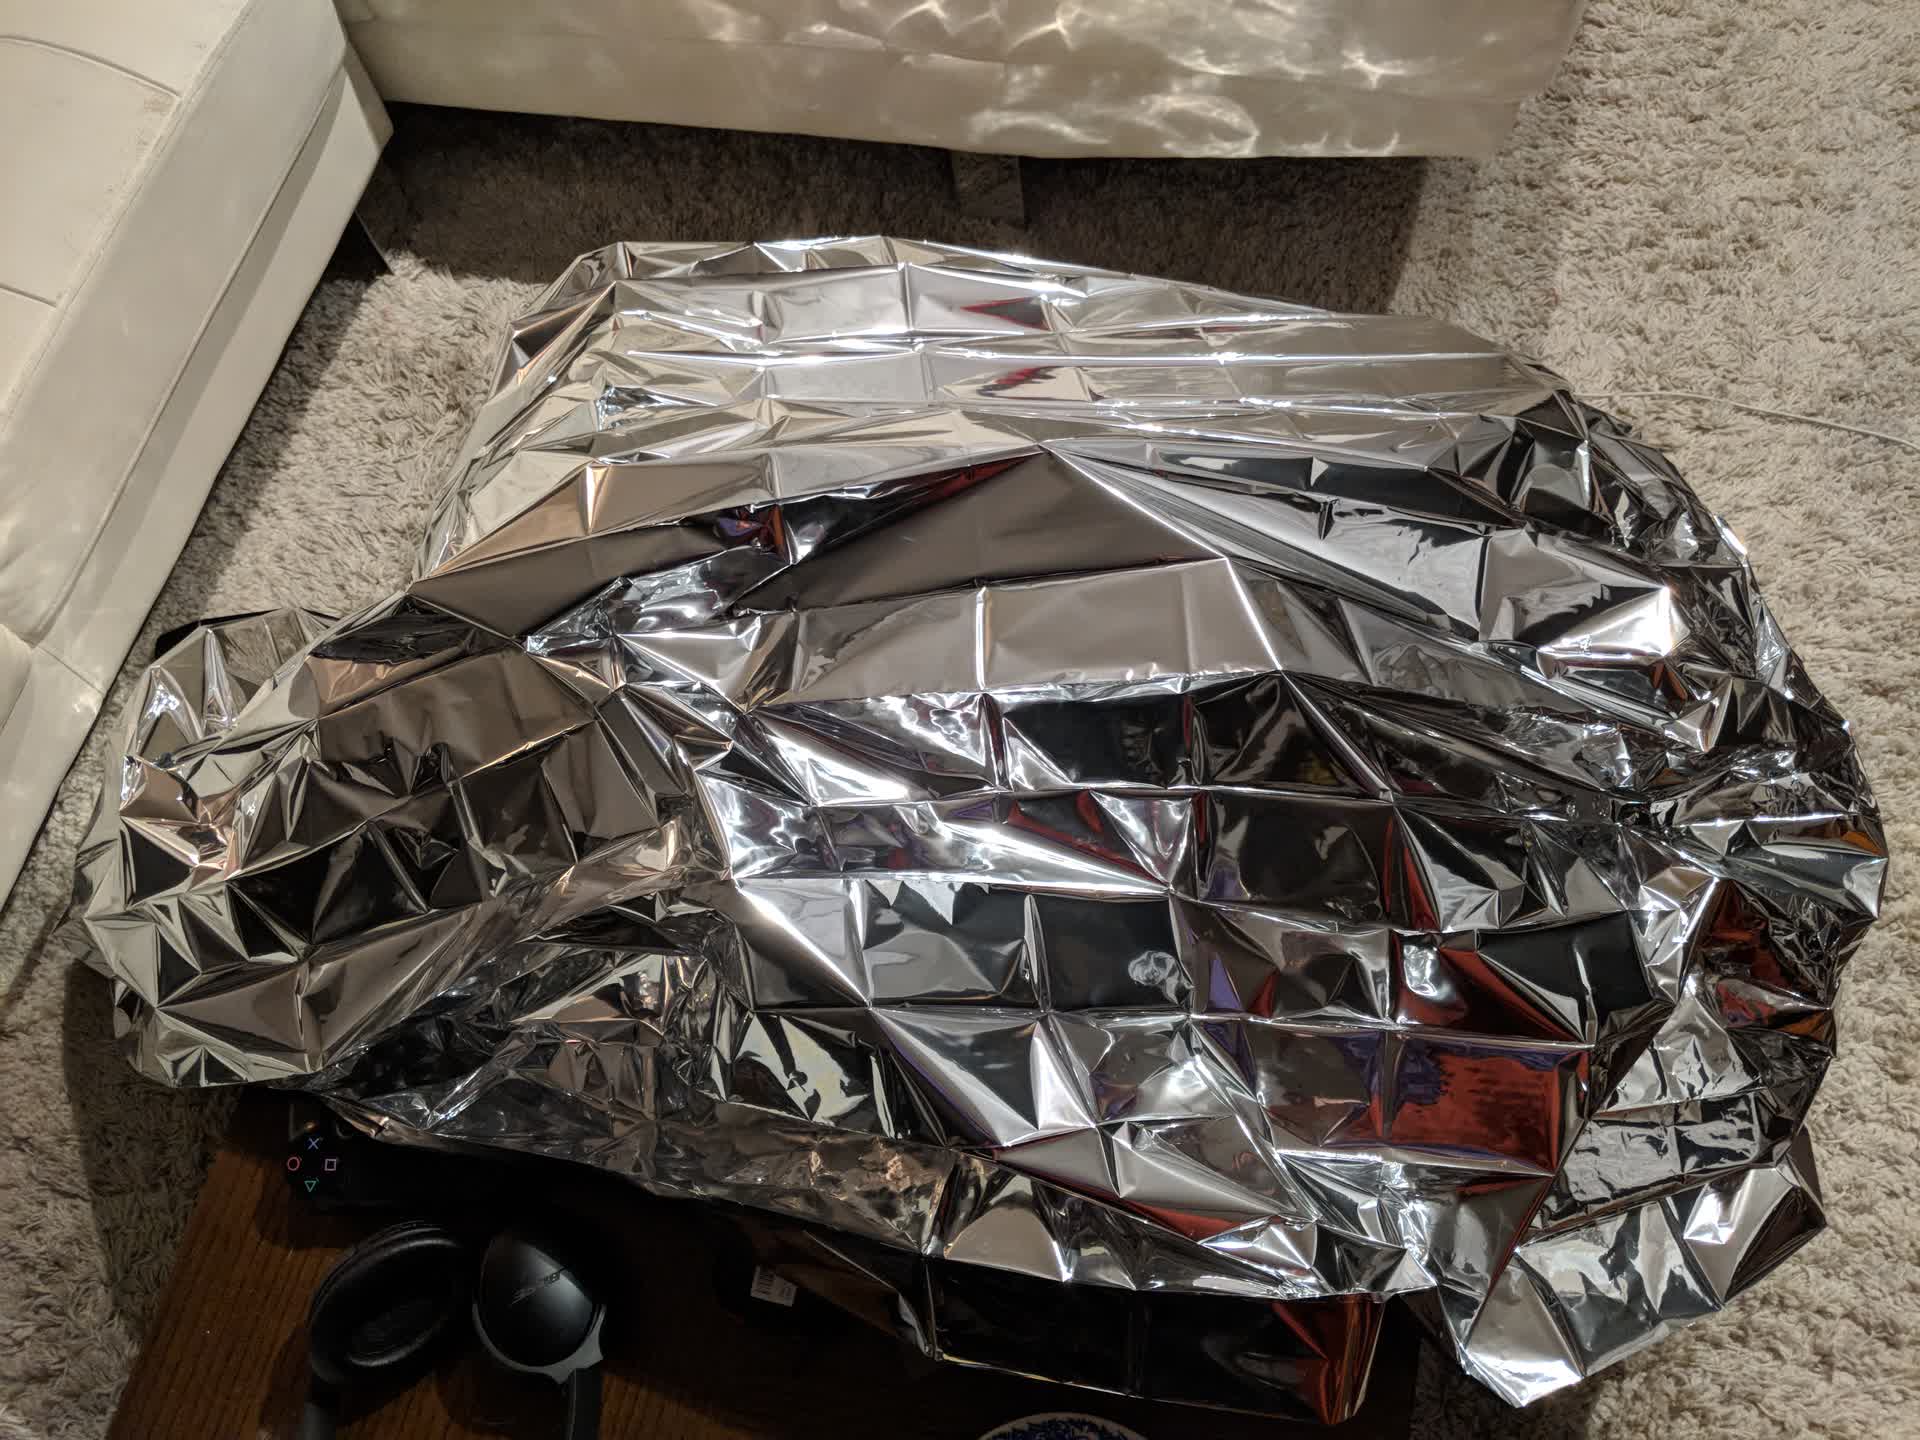 I covered the laptop in a silver mylar blanket. I don't think it made anything more secure, but it made me feel safer.